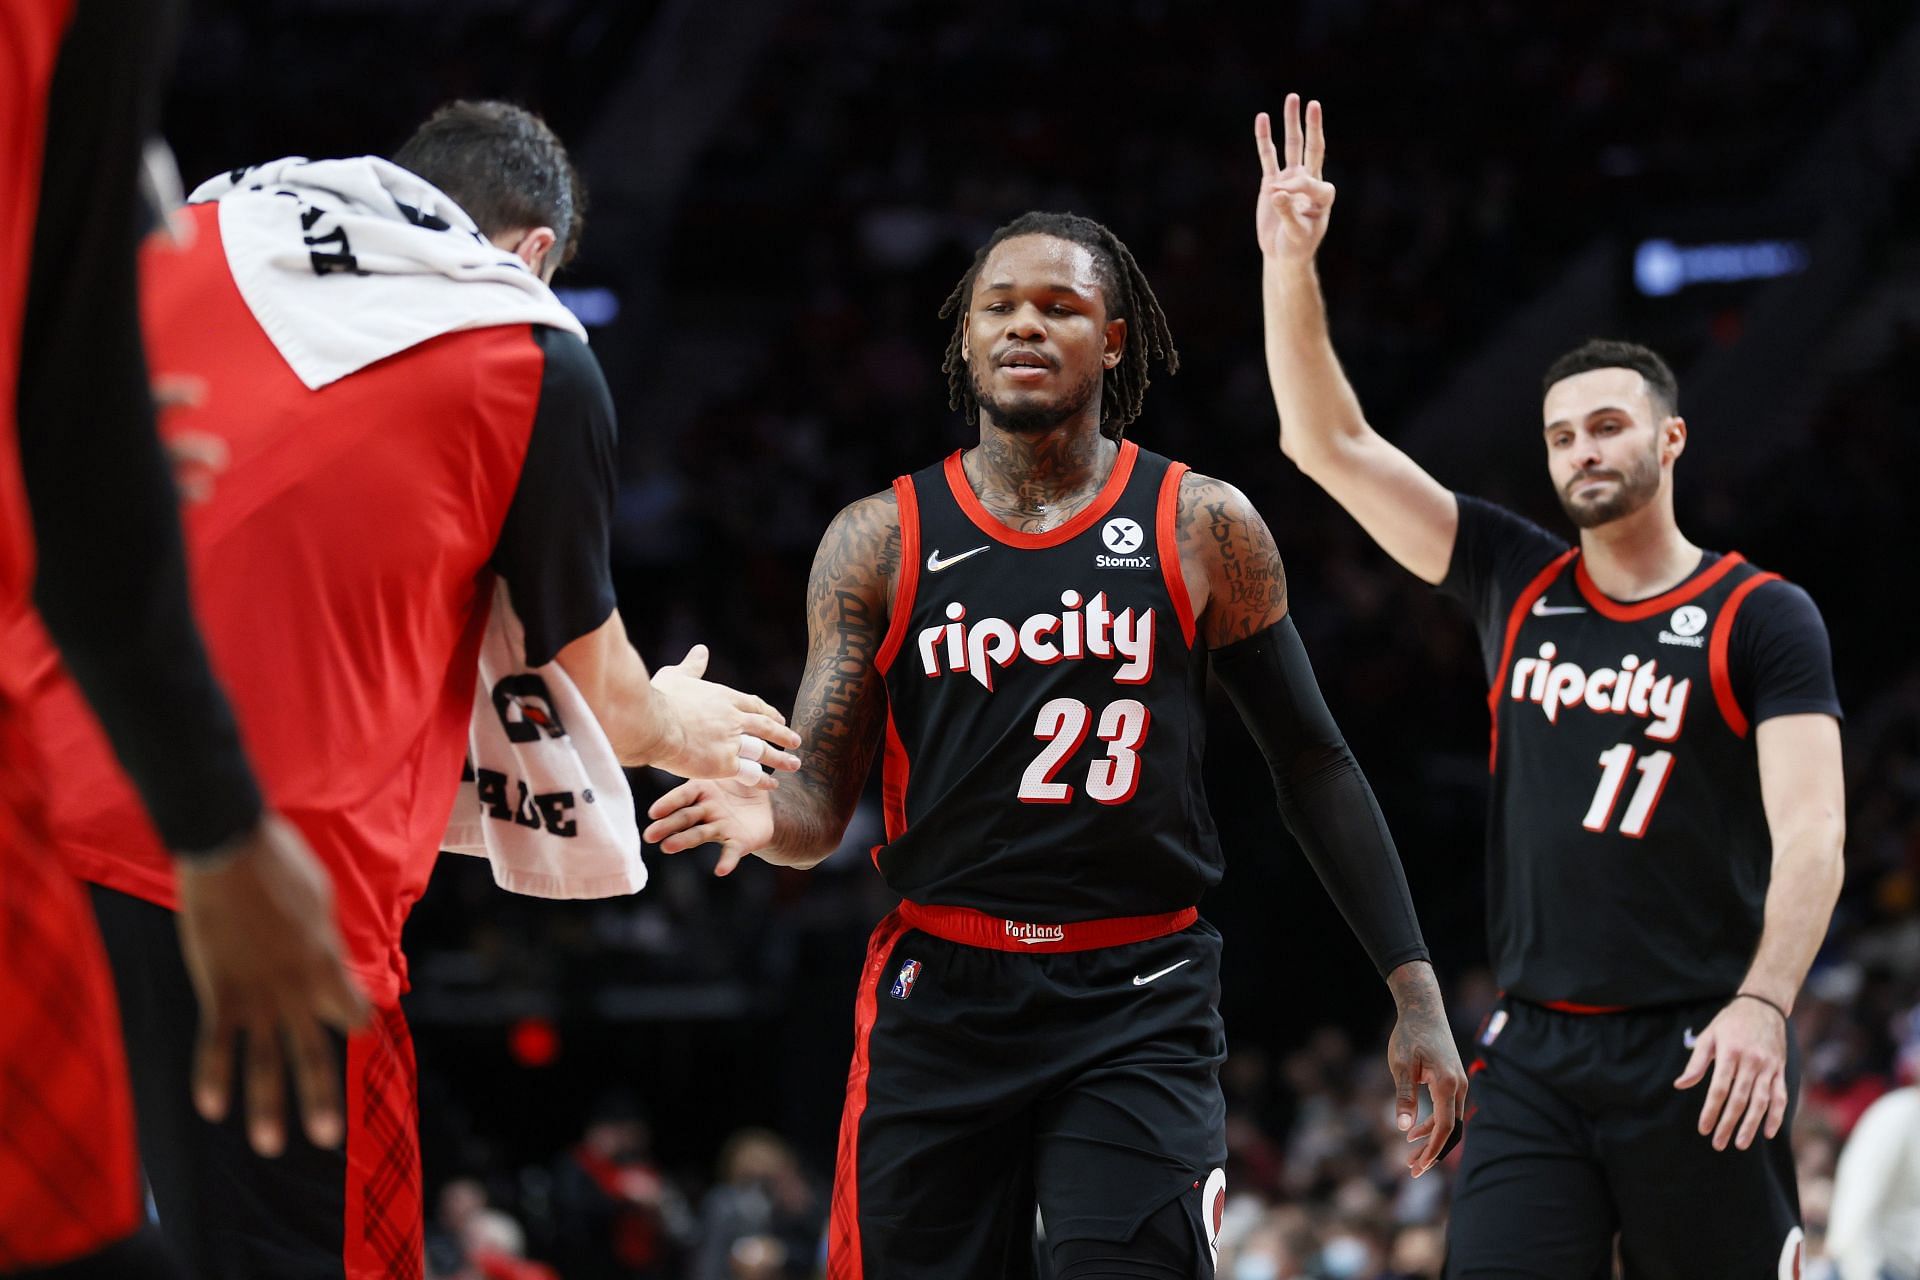 The Portland Trail Blazers are coming off an 83-114 loss against the San Antonio Spurs